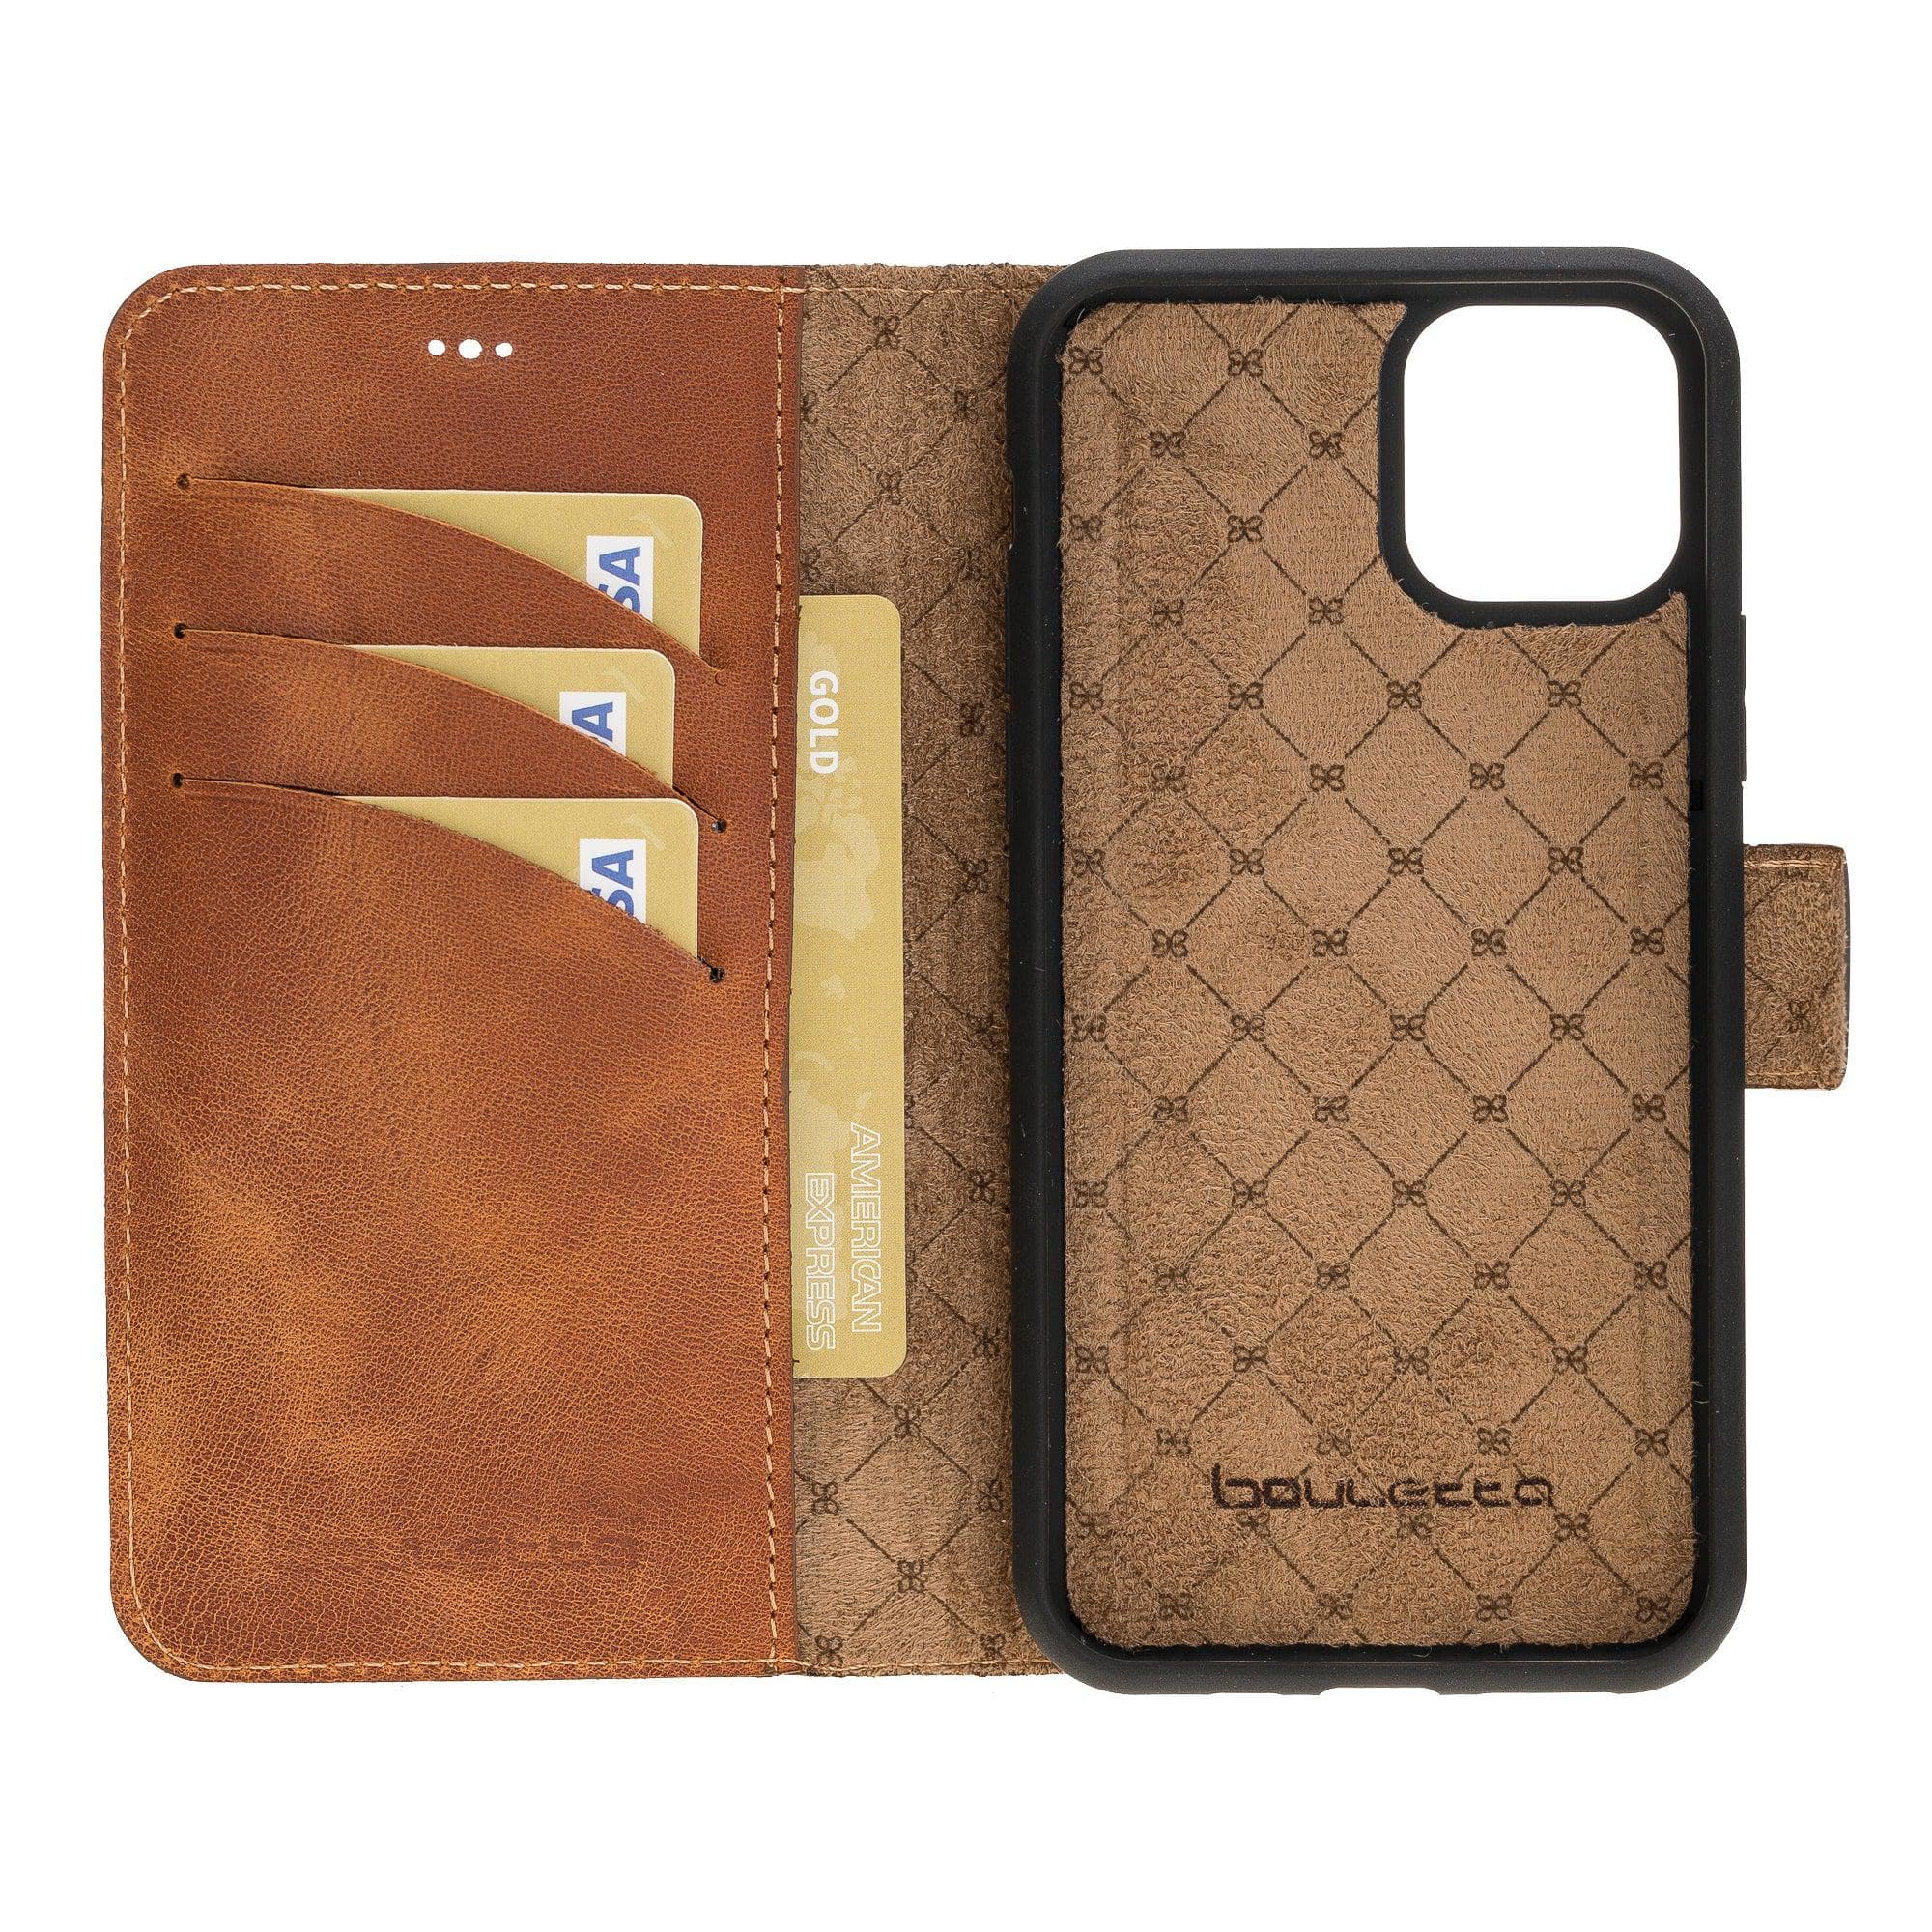 Pouch Detachable Leather Wallet Case For Apple iPhone 11 Series